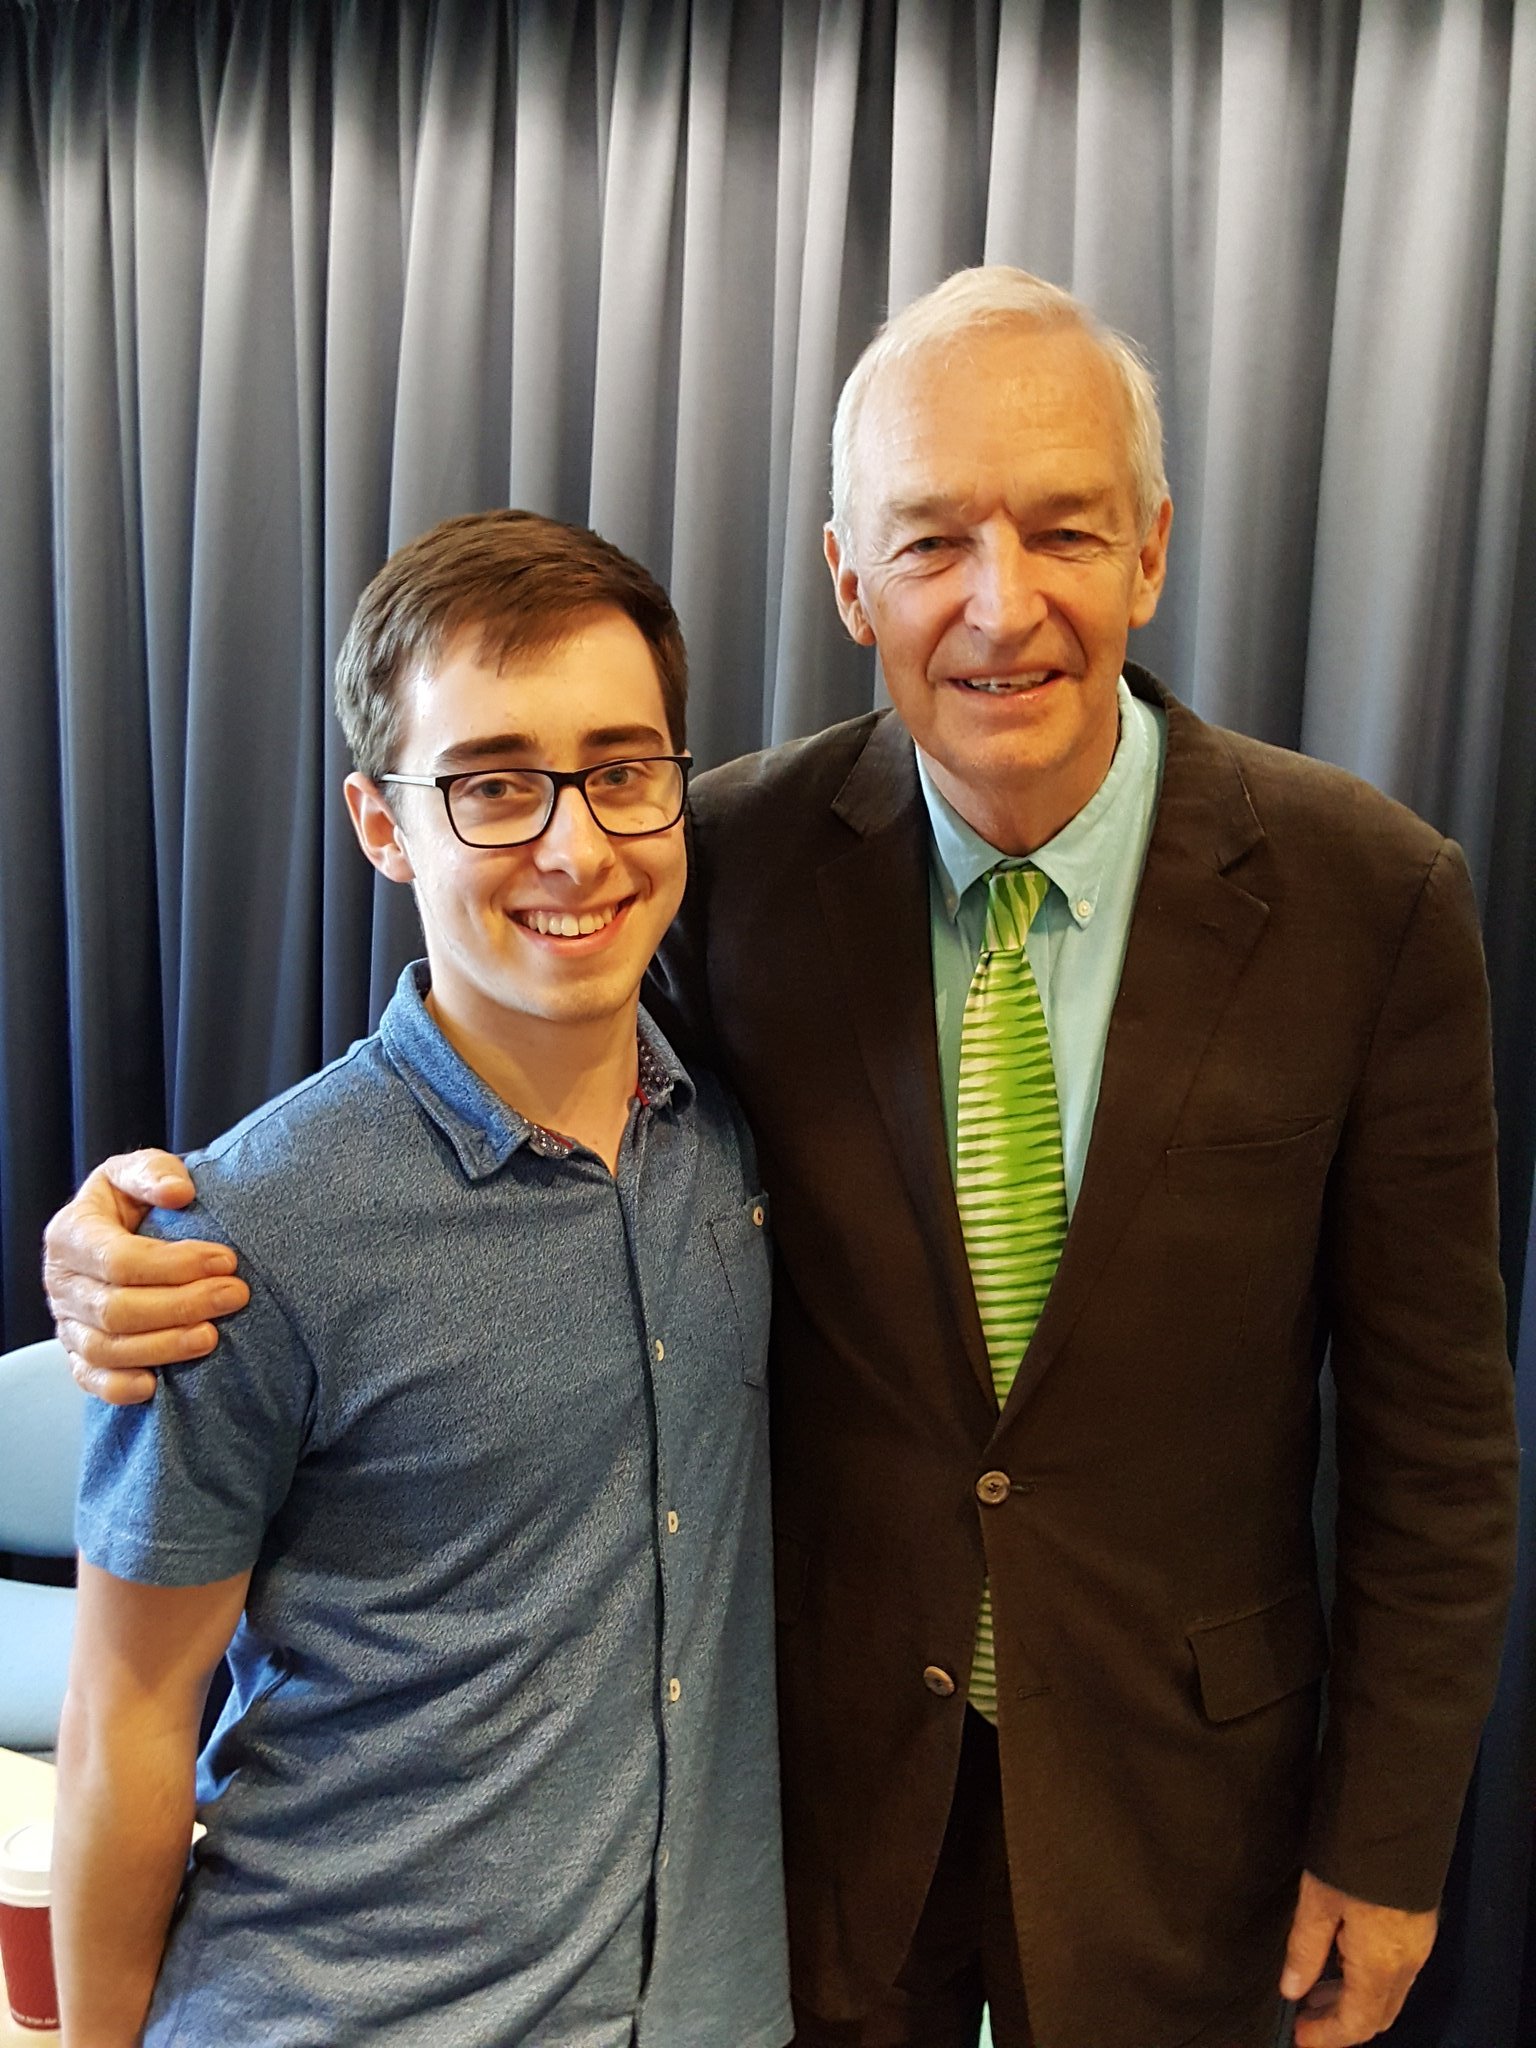 I learnt a lot of what makes me a journalist whilst at Bournemouth Uni, including a guest lecture from Jon Snow on how the industry changed in the aftermath of the Grenfell Tower tragedy.